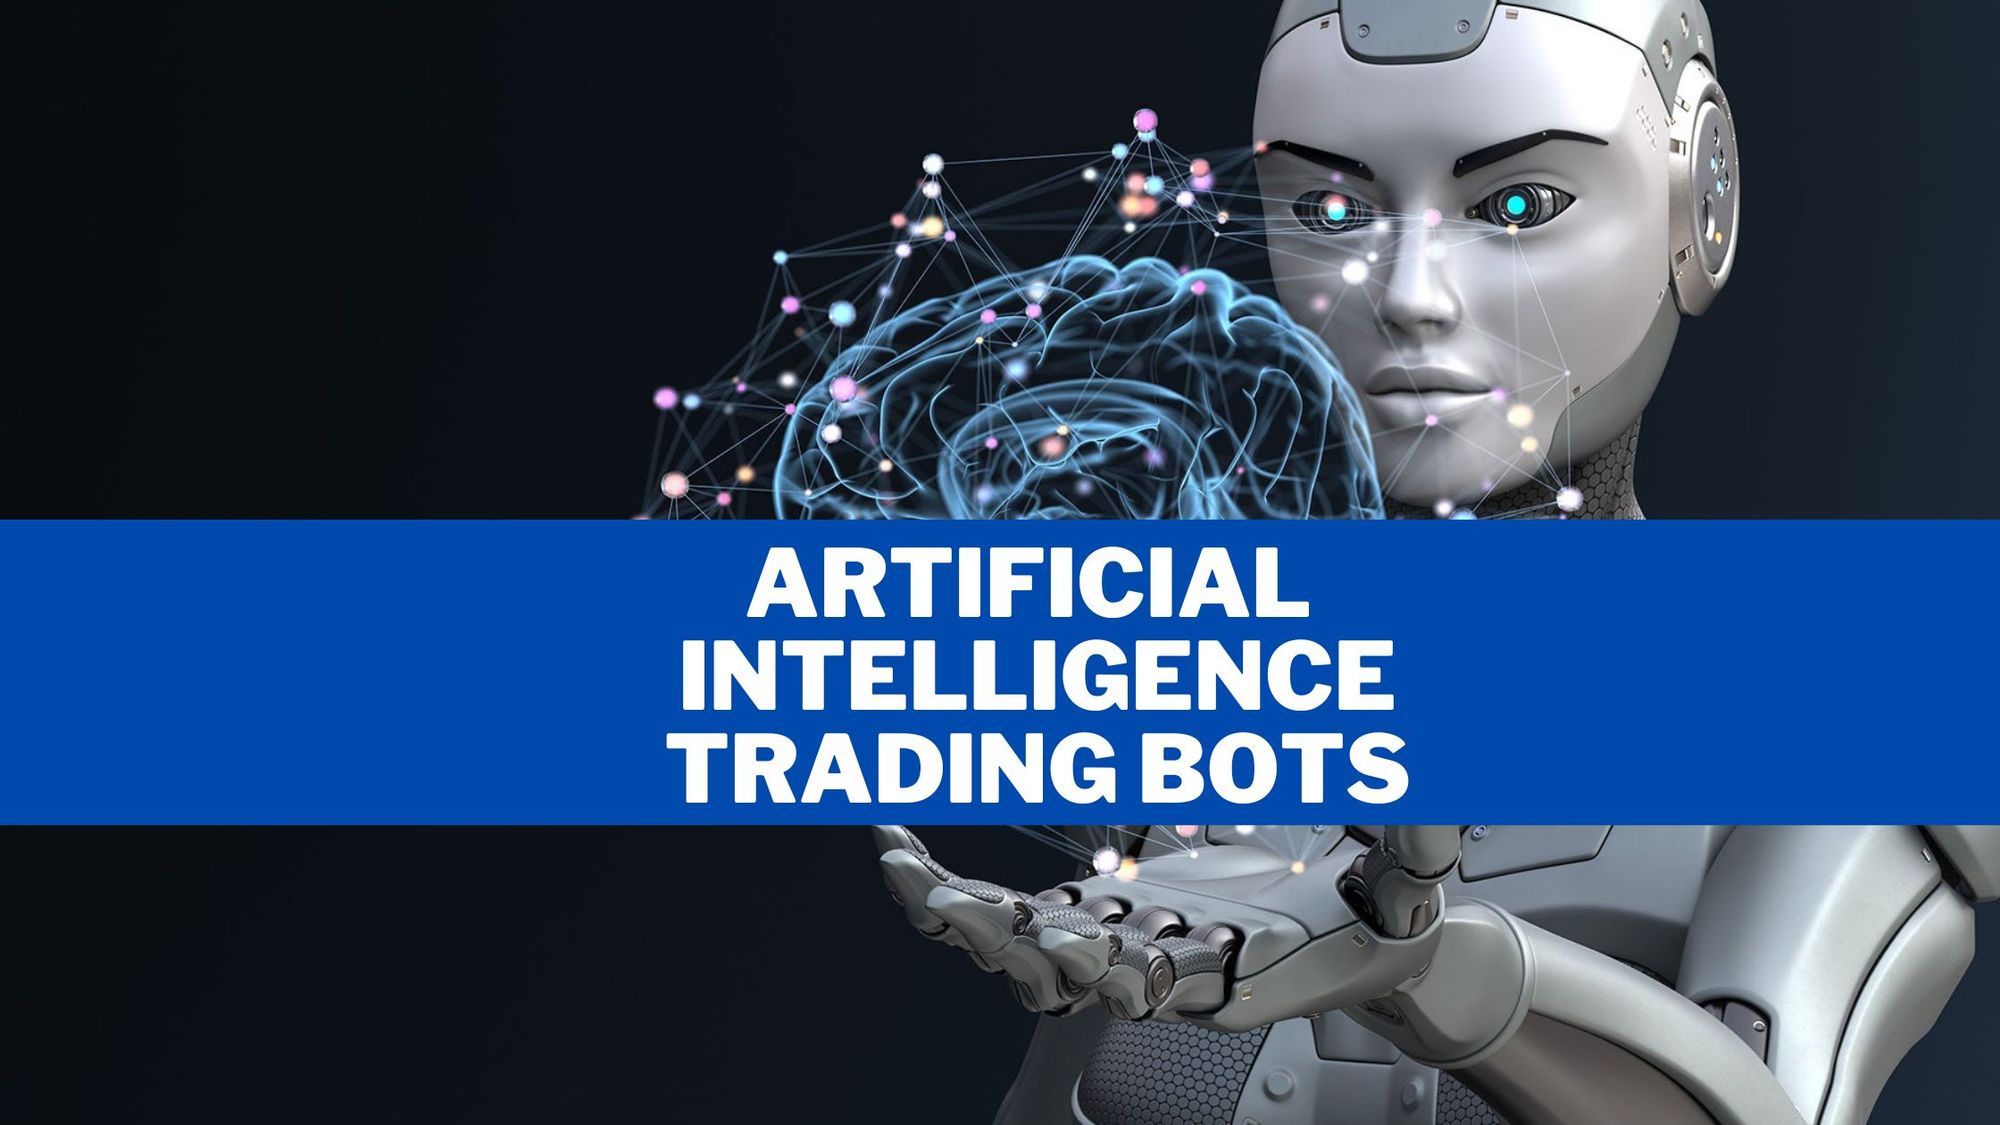 6 Top AI Trading Bot Platforms and Software – Composer